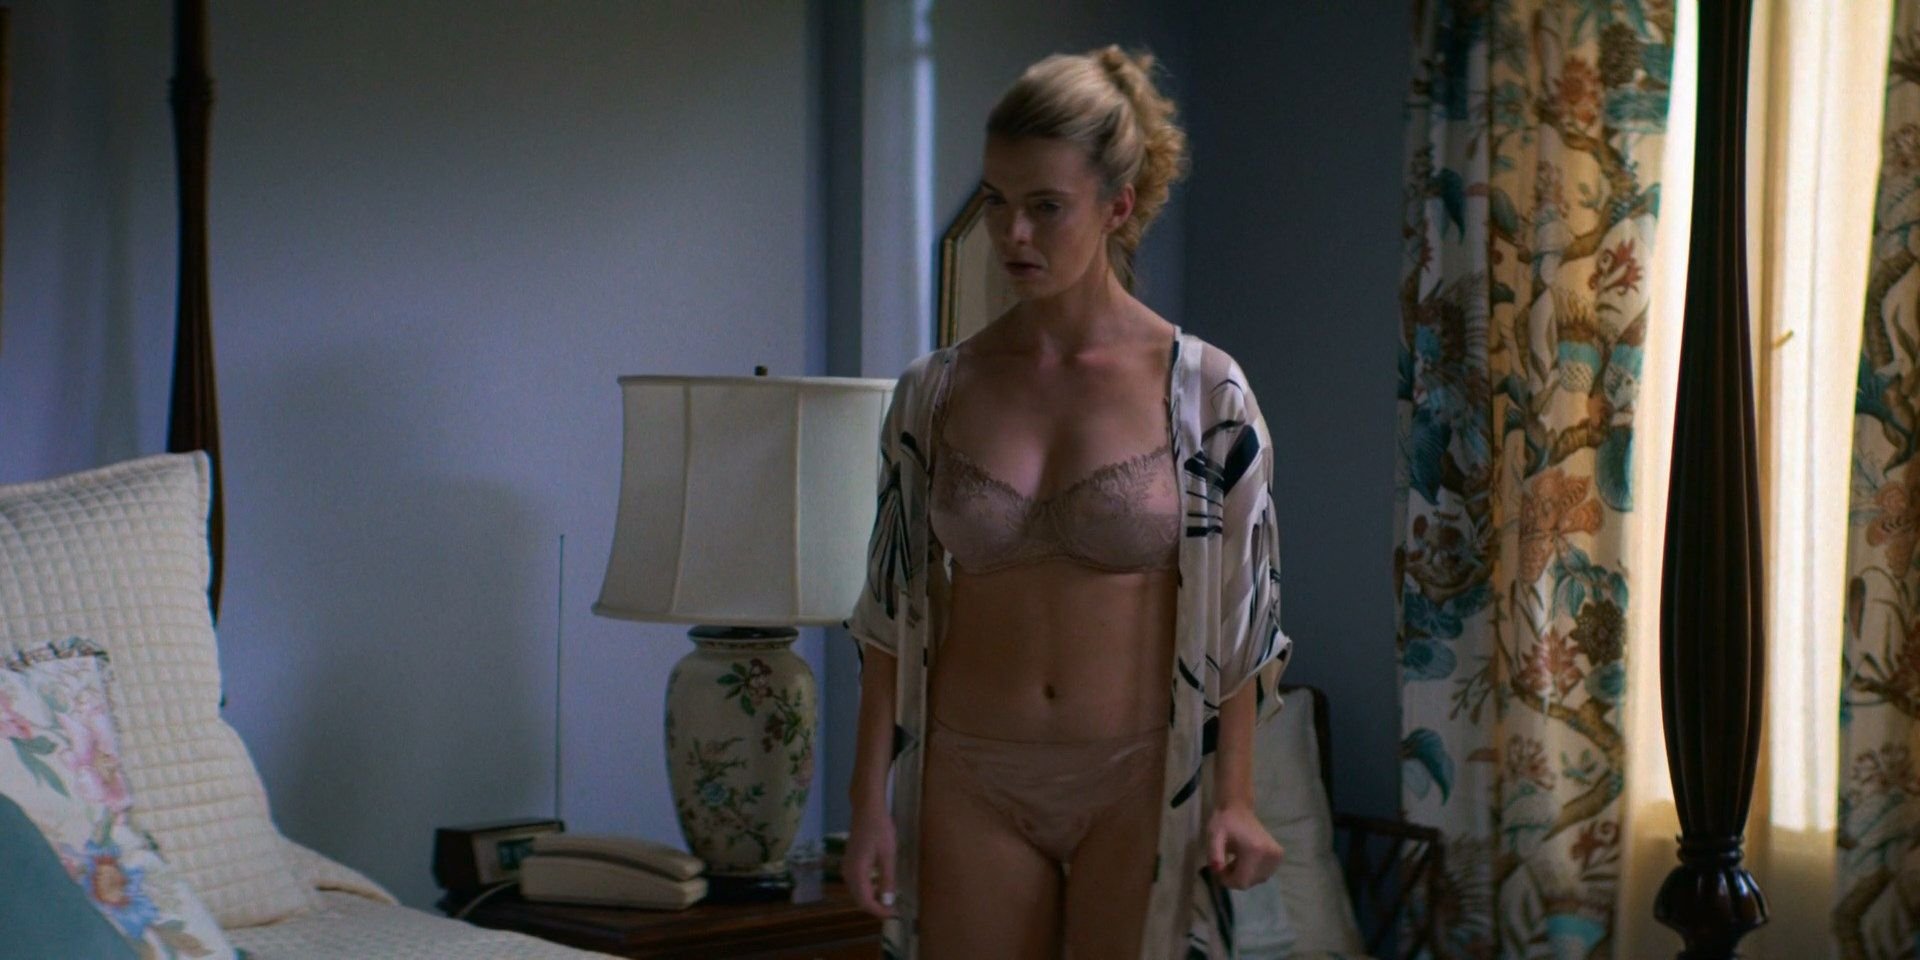 Betty gilpin fappening